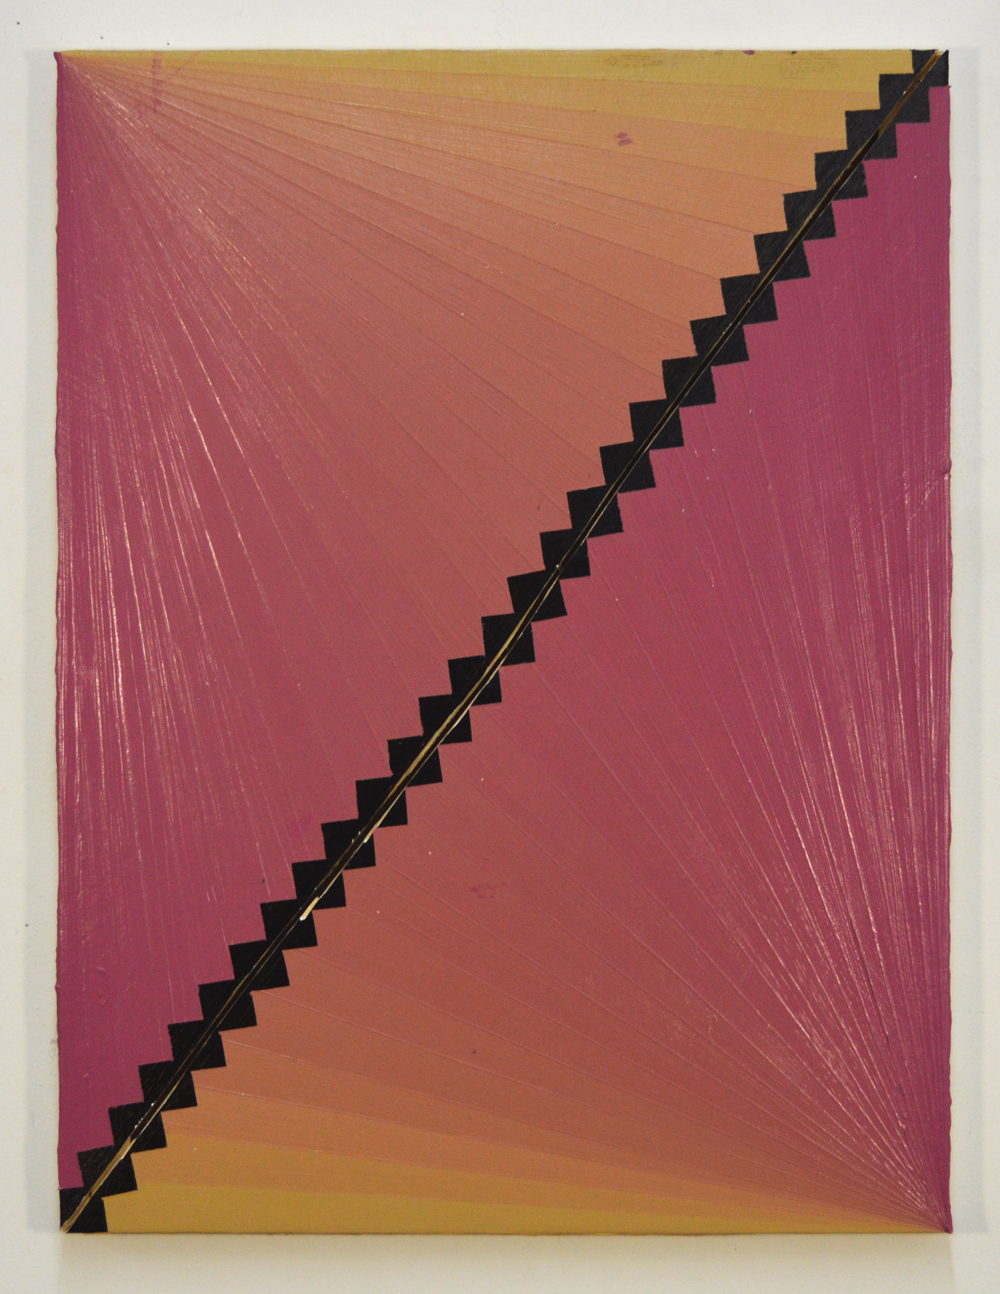  Untitled  Acrylic on panel  24 x 18 in  2013 